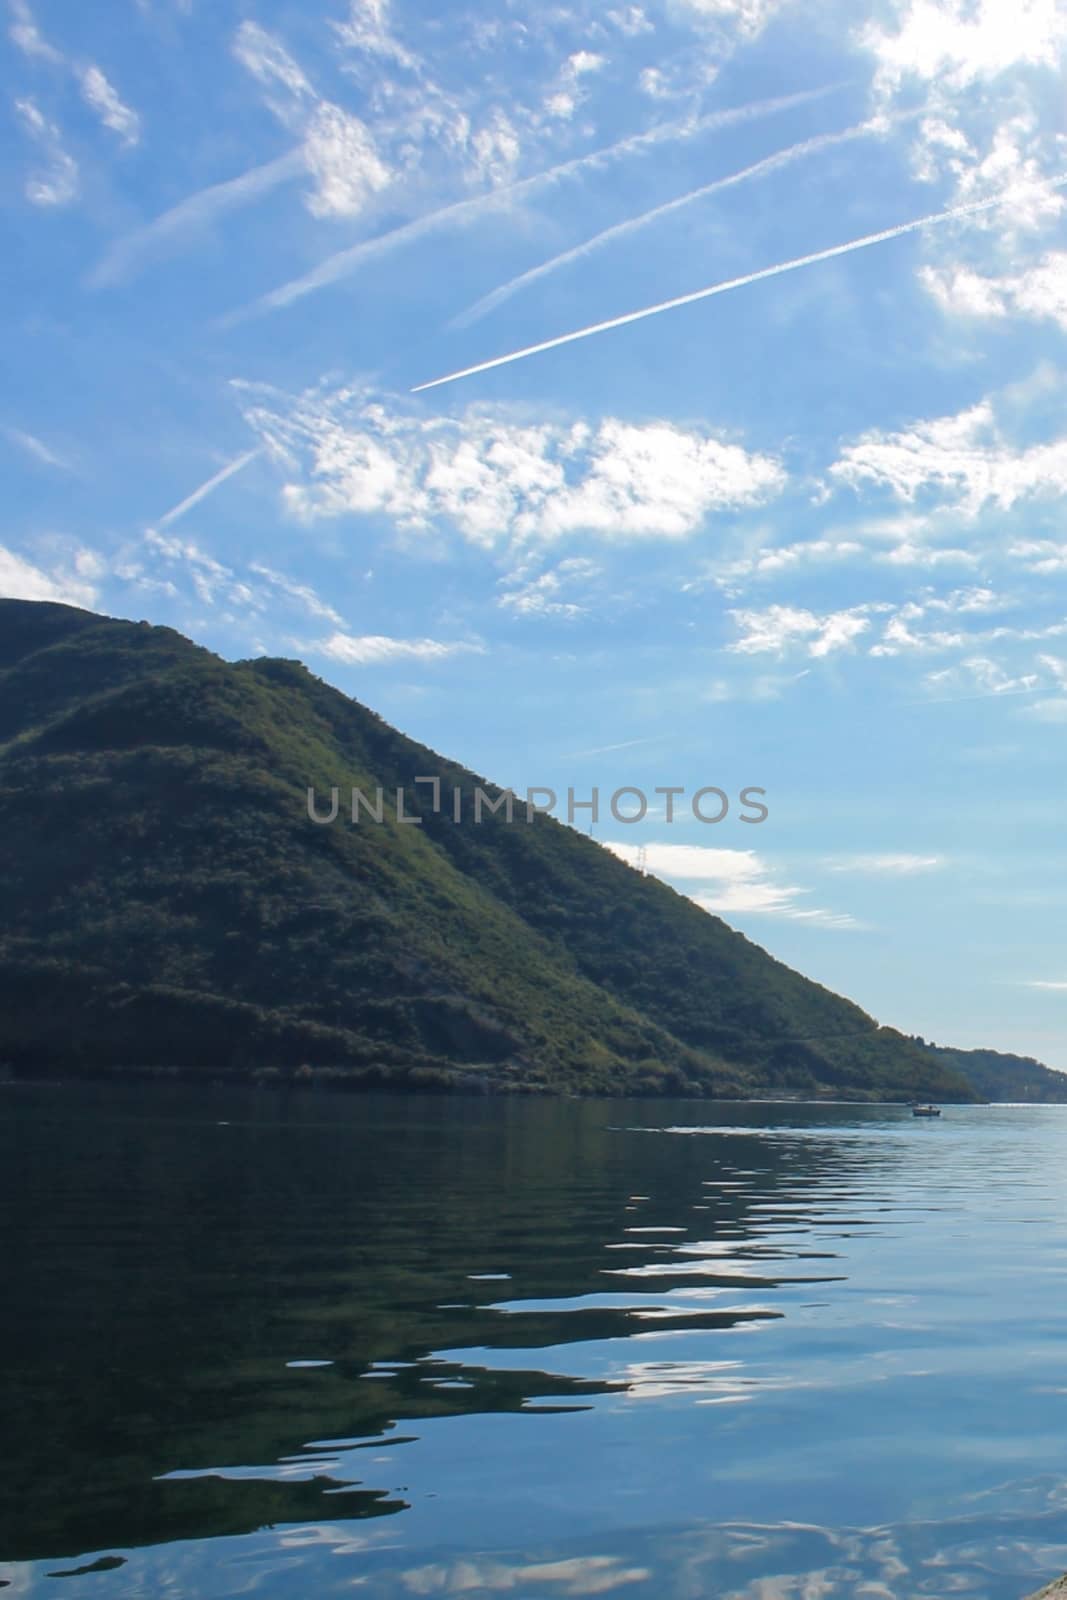 A body of water with a mountain in the background. High quality photo